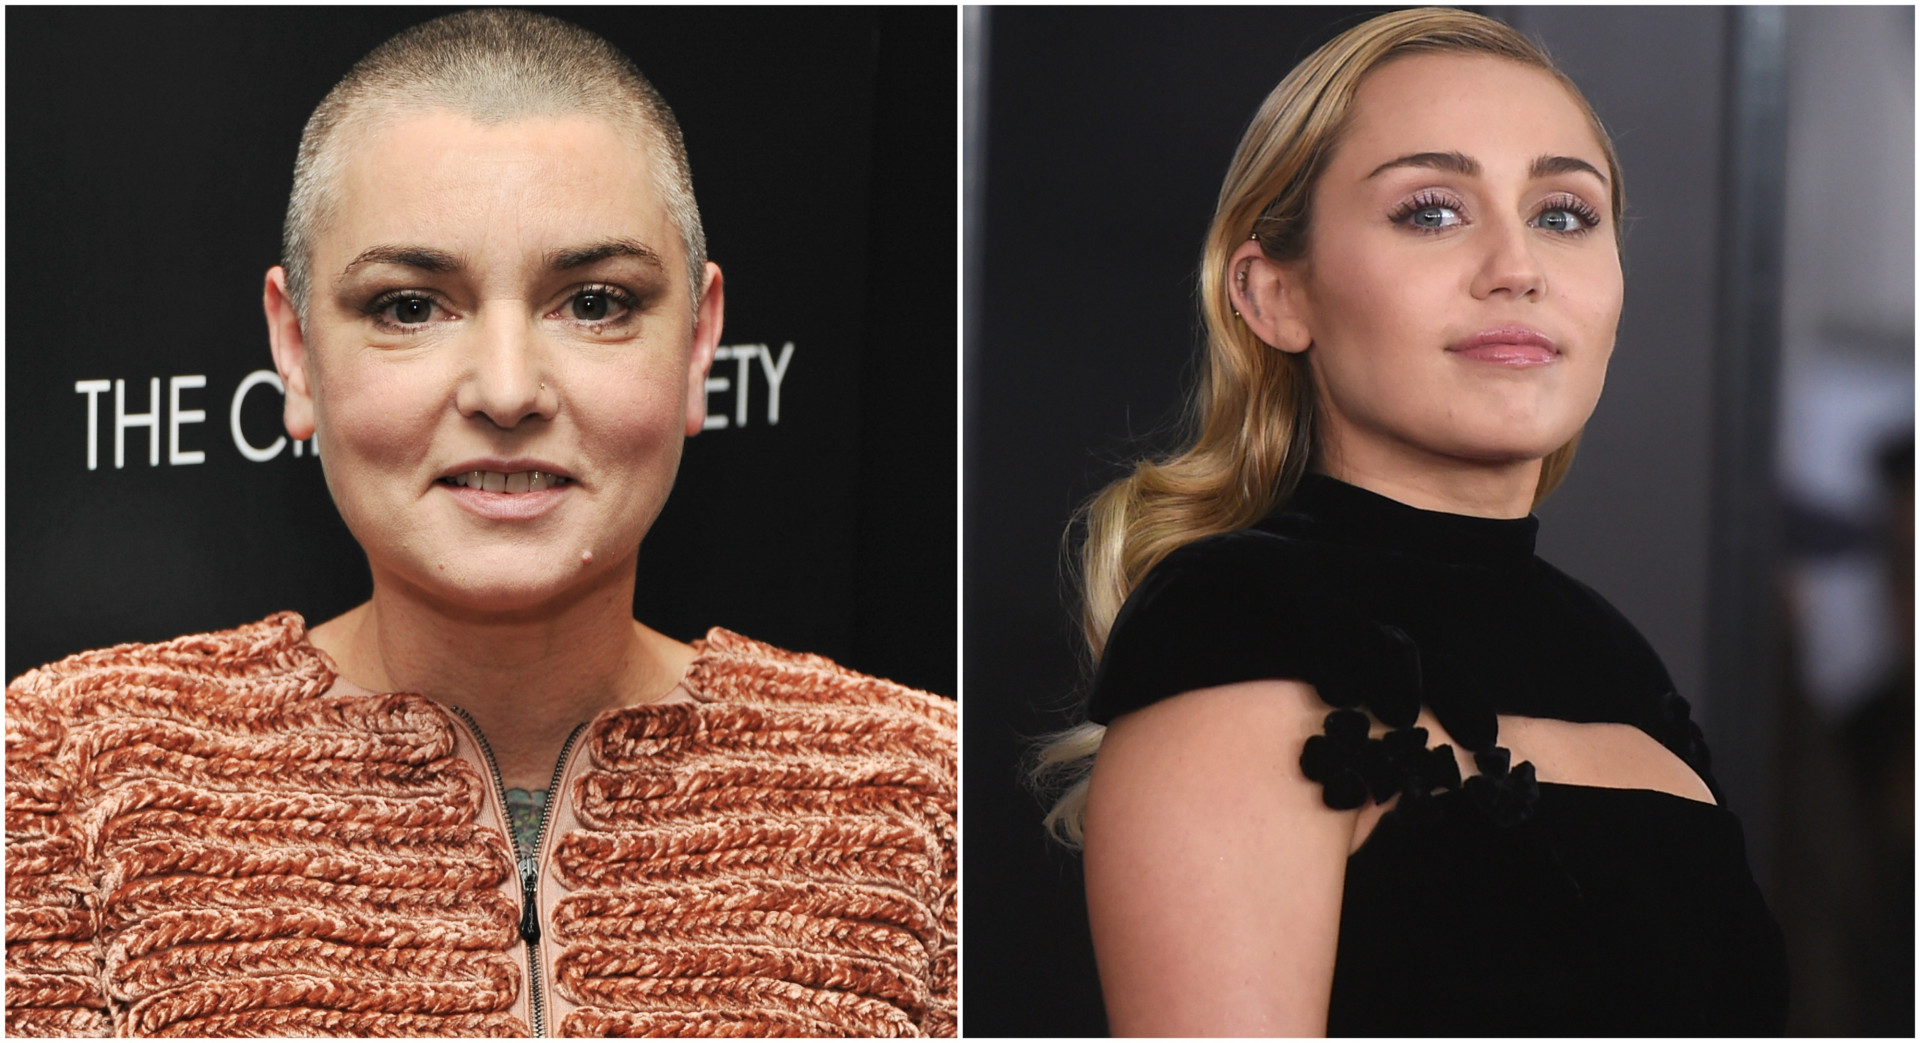 <p>In 2013, Sinead O'Connor penned a letter to Miley Cyrus, expressing concerns about her new image and exploitation in the music industry.</p>